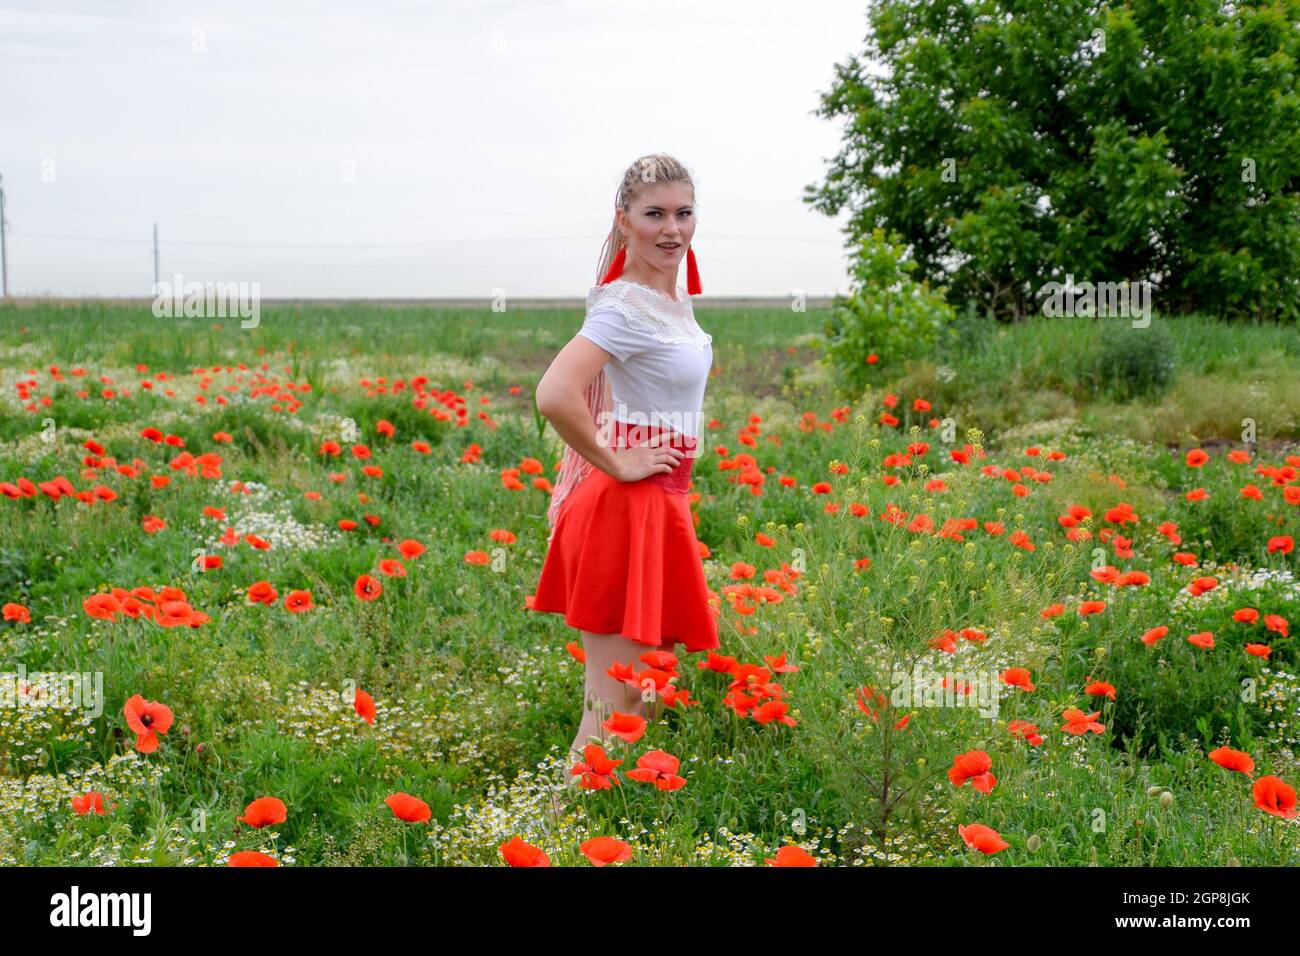 Blonde young woman in a red skirt and white shirt, red earrings is in the middle of a poppy field. Stock Photo